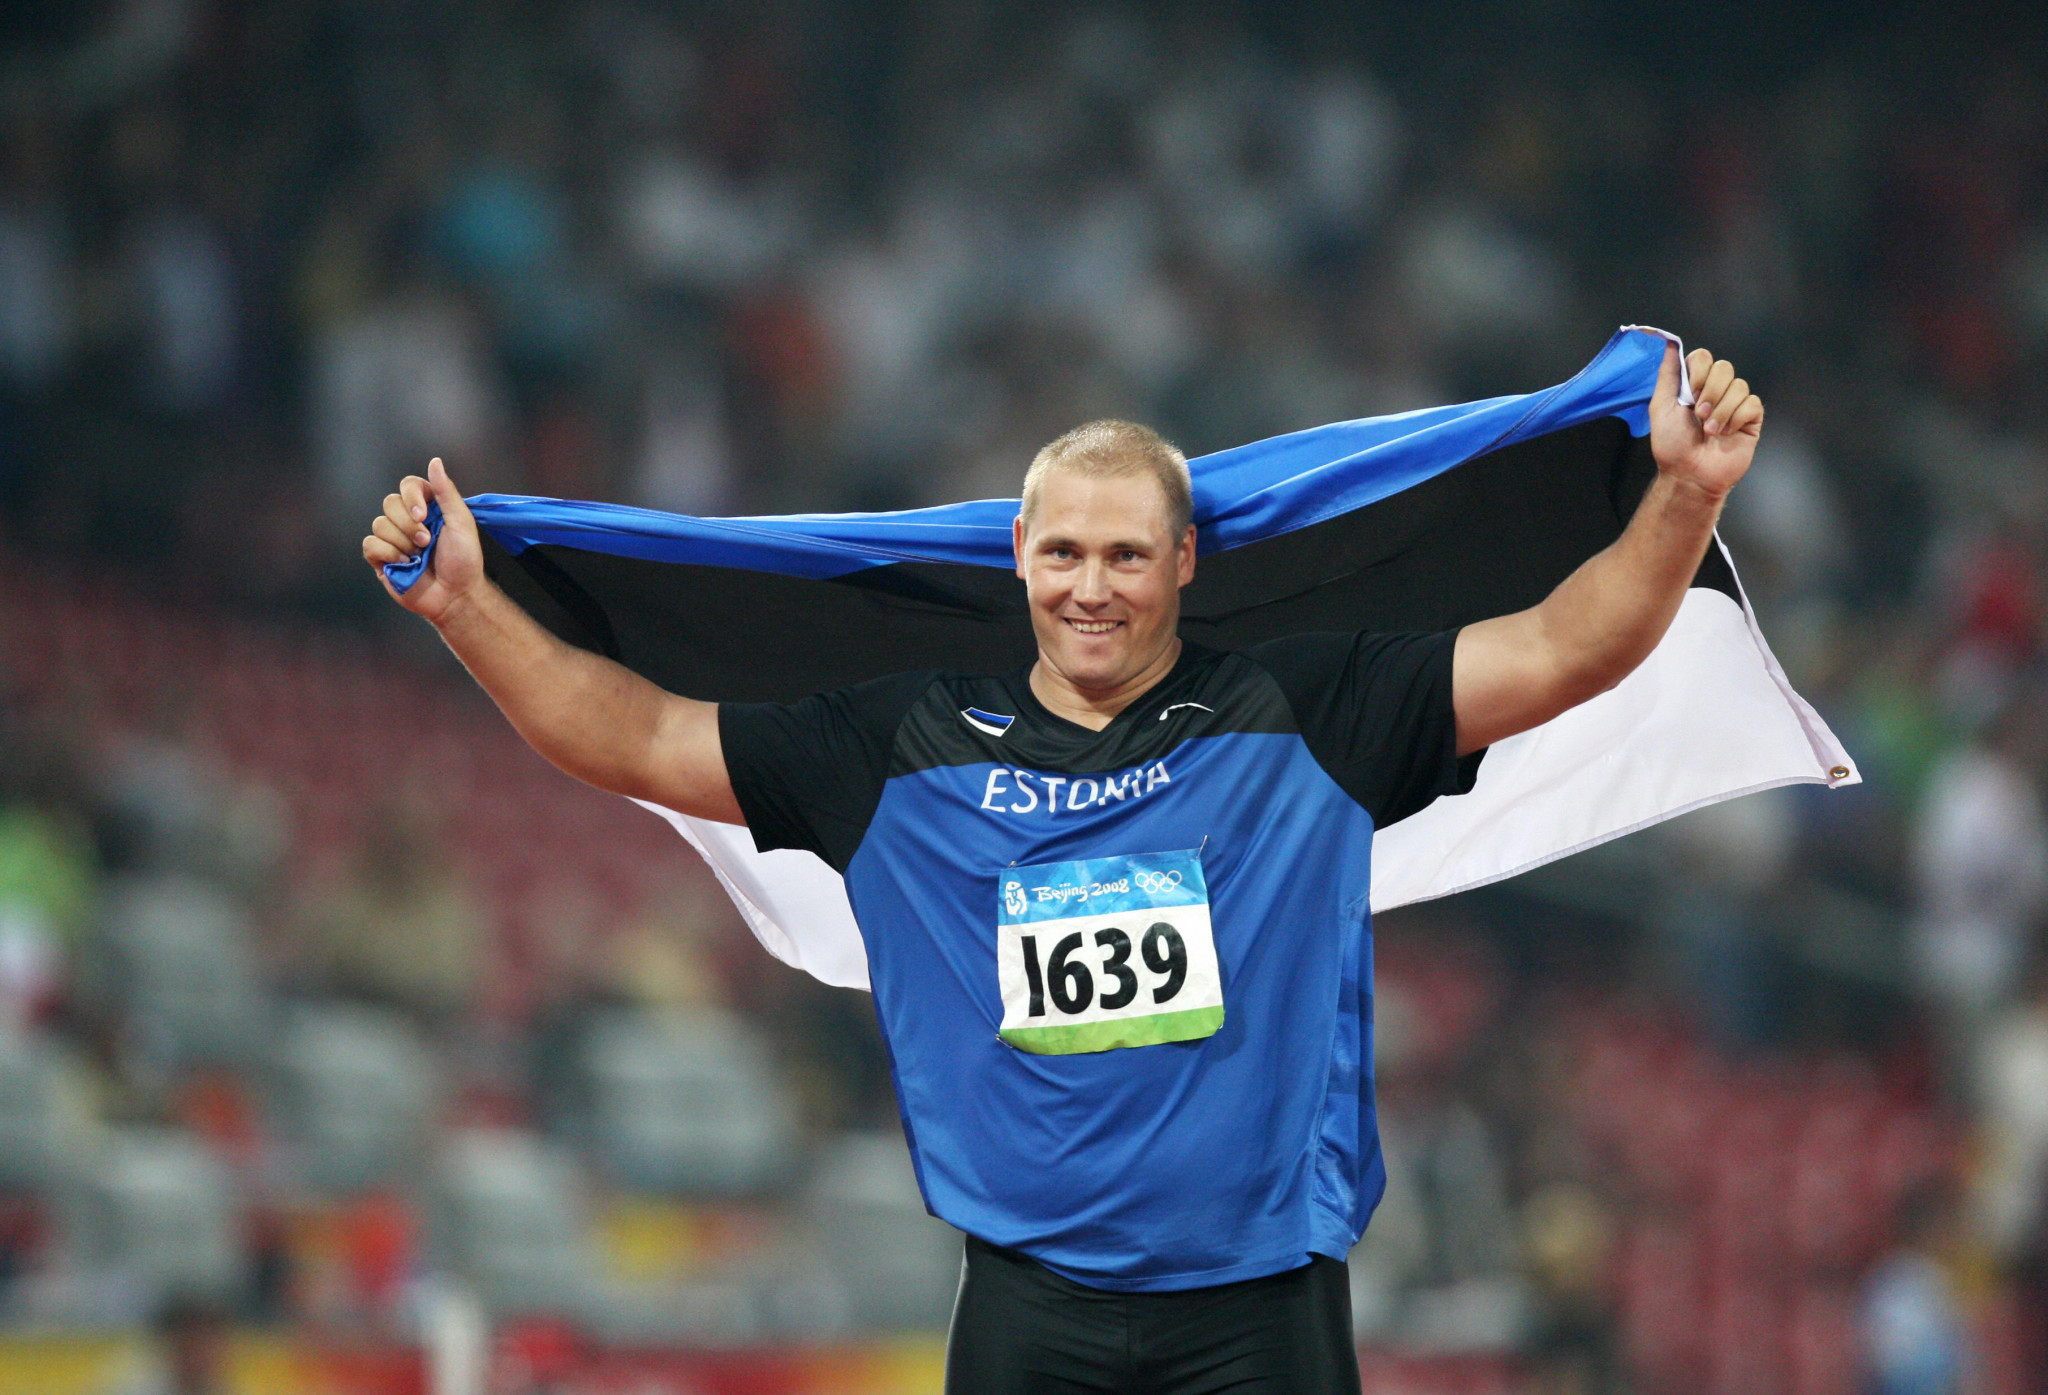 Beijing 2008 discus gold medallist Gerd Kanter has been re-elected as EOC Athletes' Commission chairman ©Getty Images